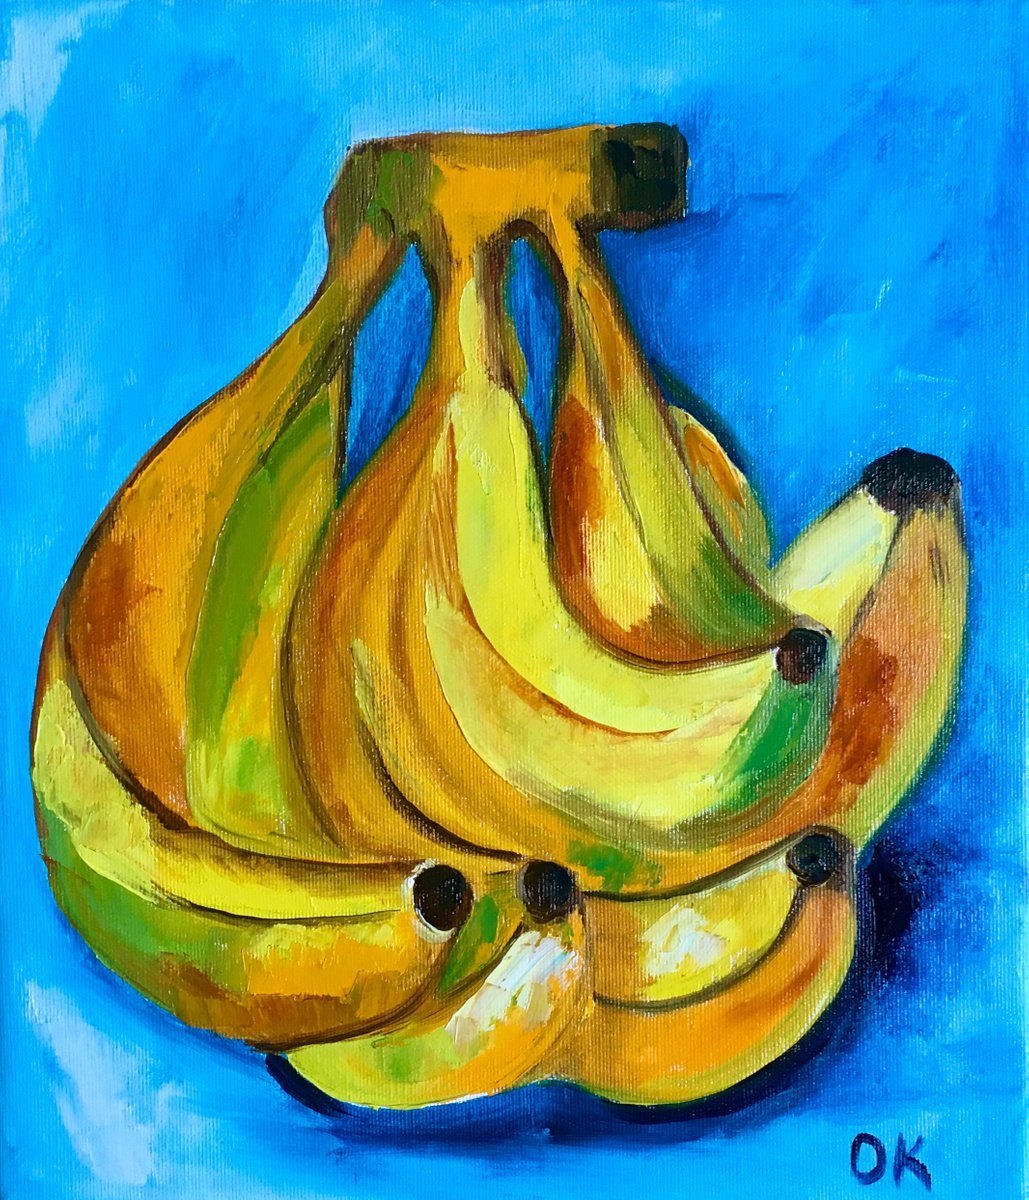 Bananas on turquoise Still life. Palette knife painting on linen canvas by Olga Koval